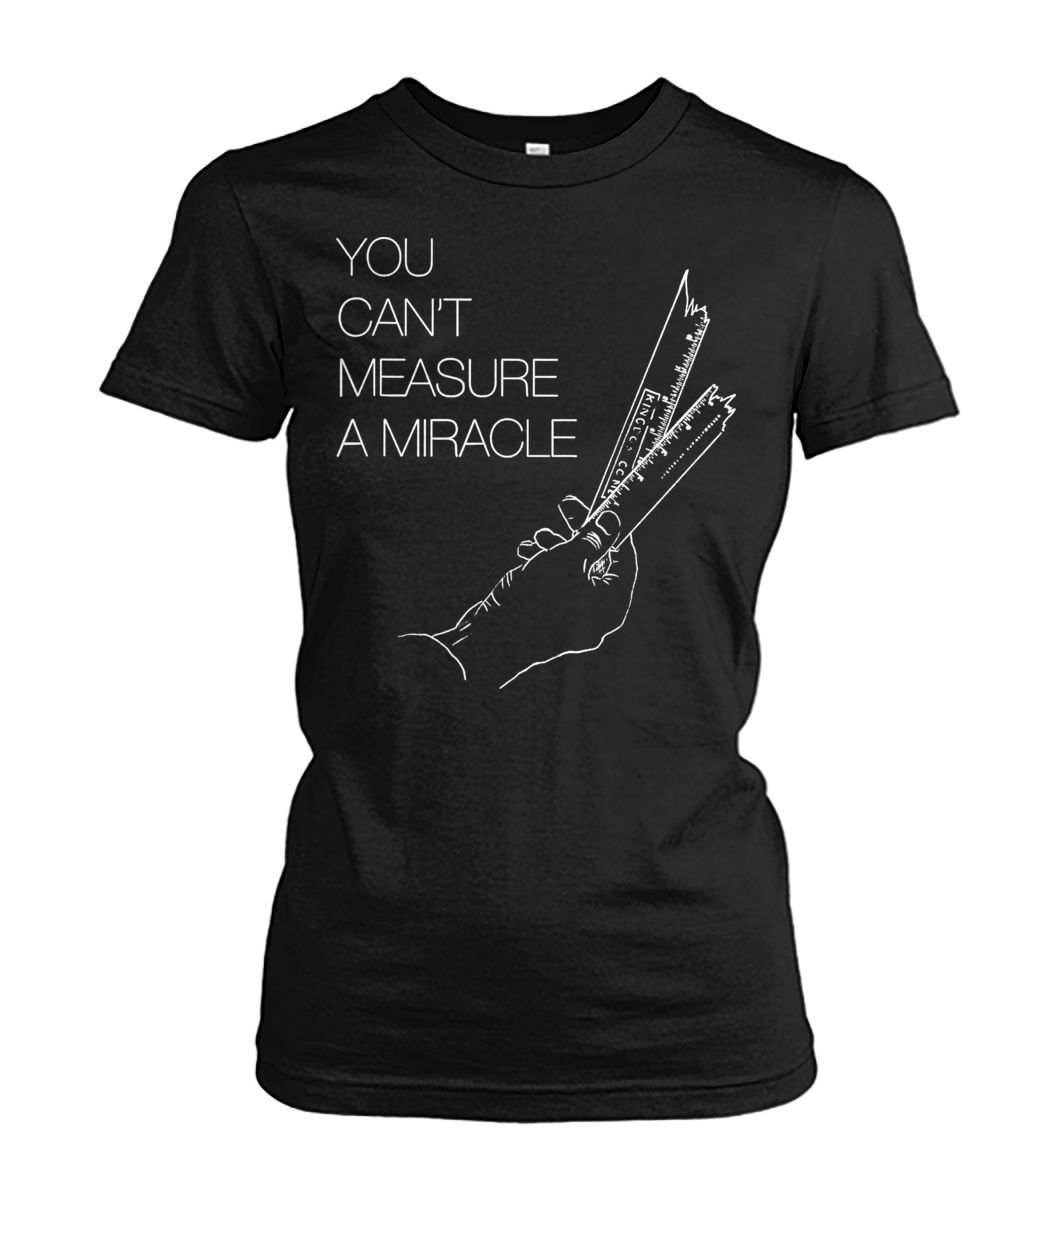 You can't measure a miracle women's crew tee